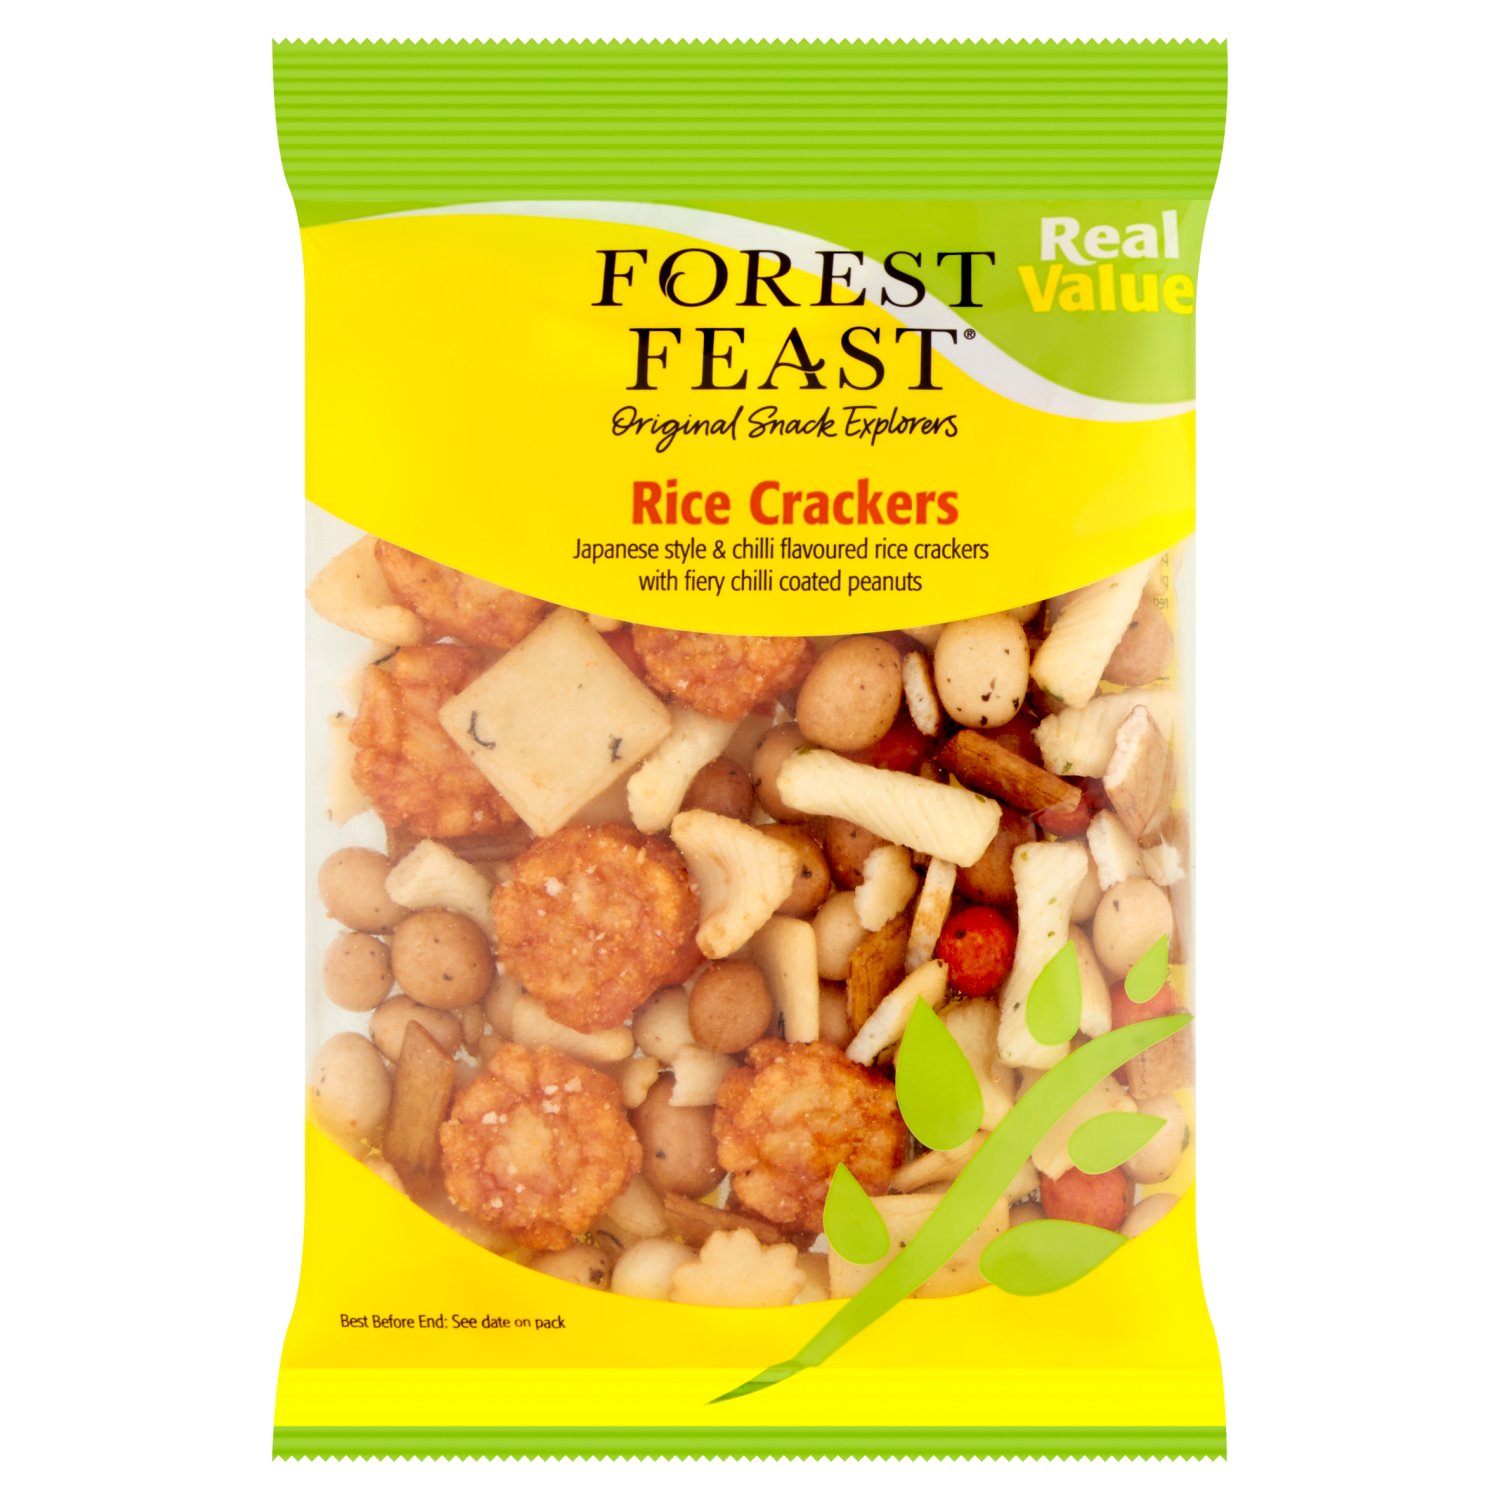 Forest Feast Real Value Rice Crackers Bag (120 g)